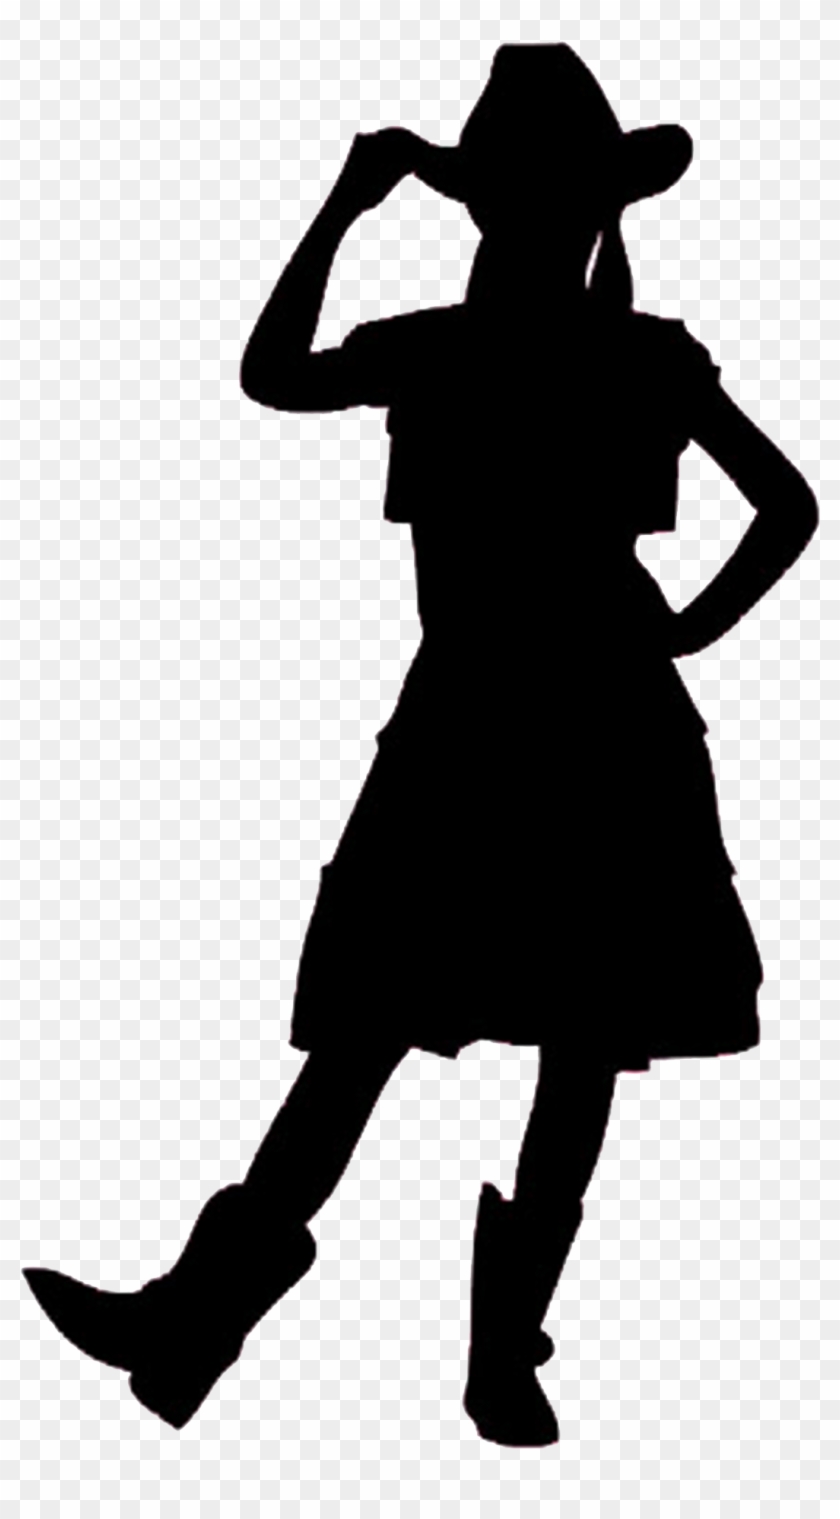 Silhouette Cowboy Woman On Top Clip Art - Silhouette Cowgirl Hat Clip Art #364374